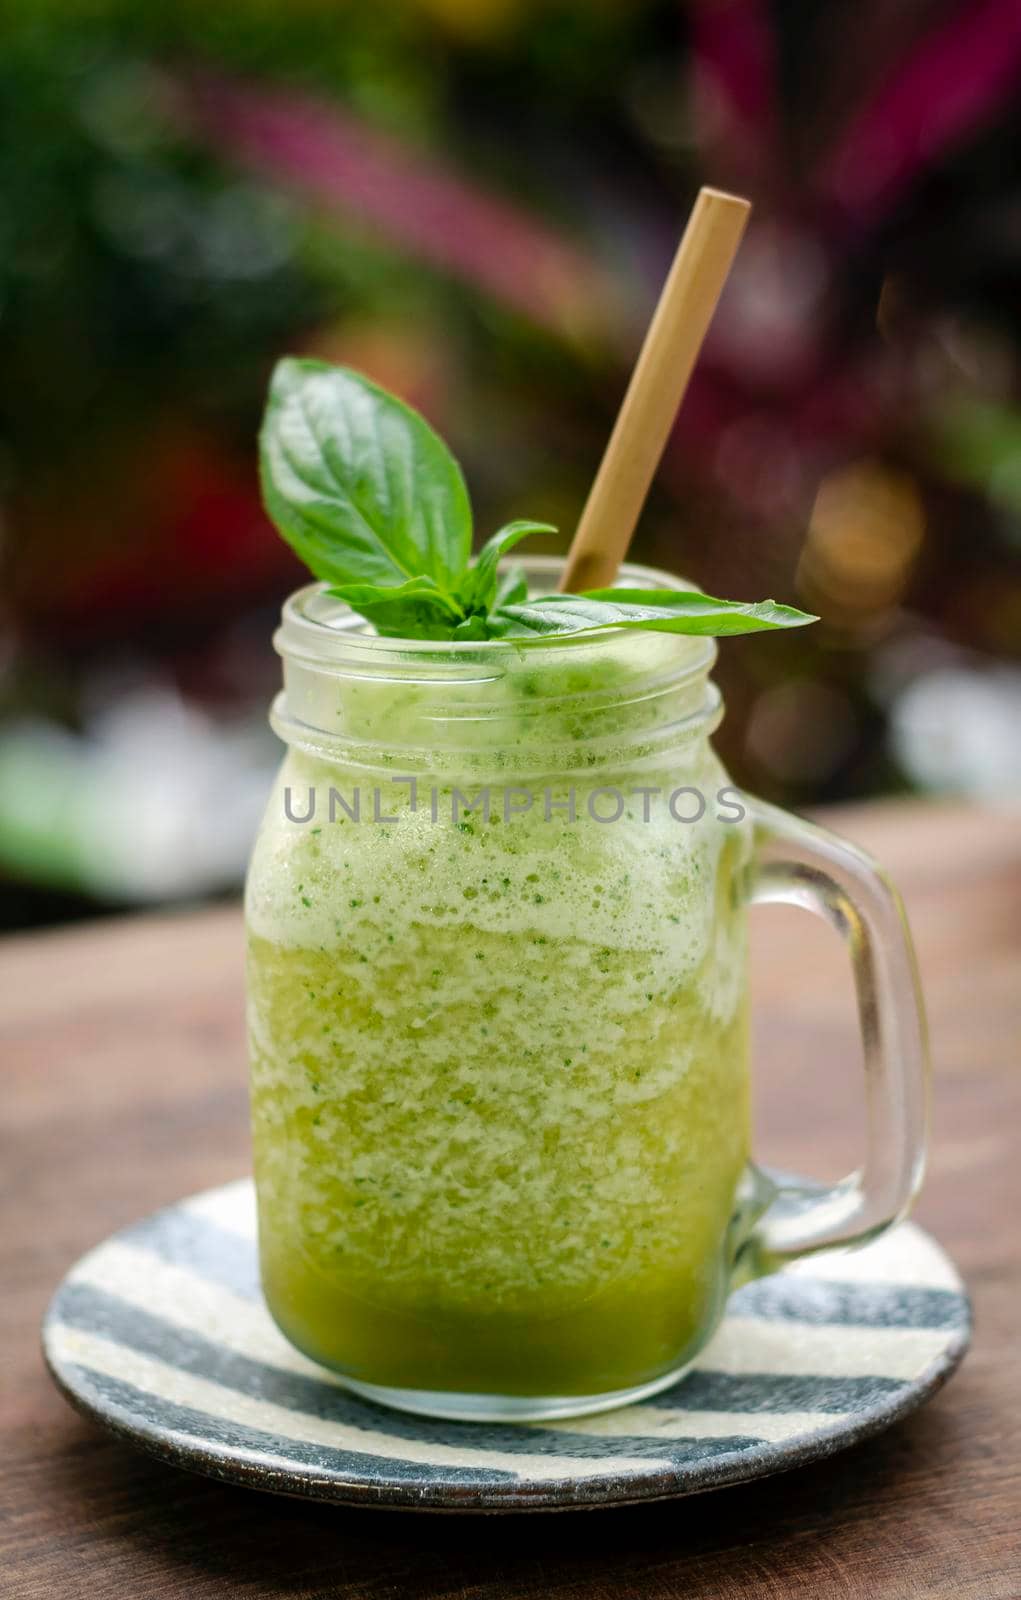 pineapple kiwi and basil fruit detox healthy smoothie drink by jackmalipan